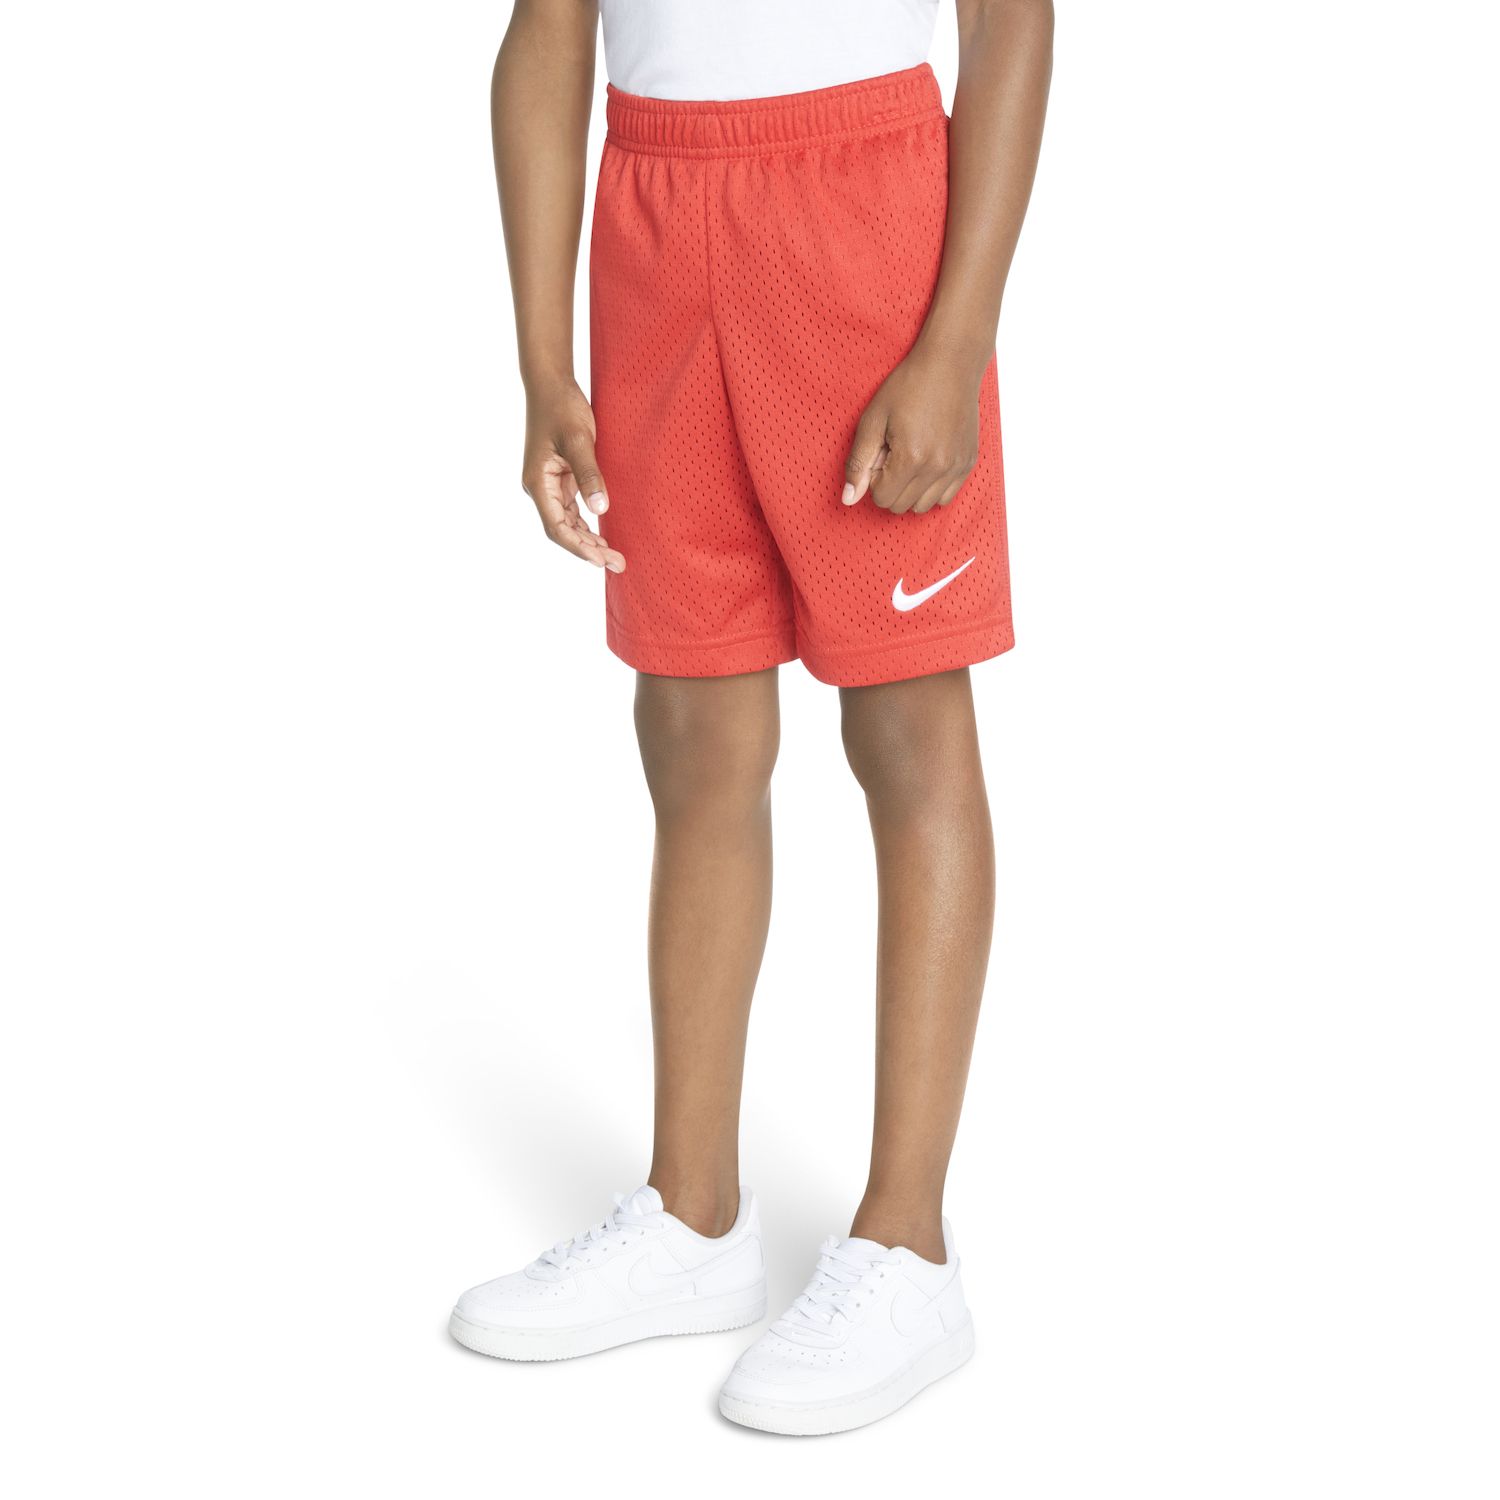 6t nike clothes